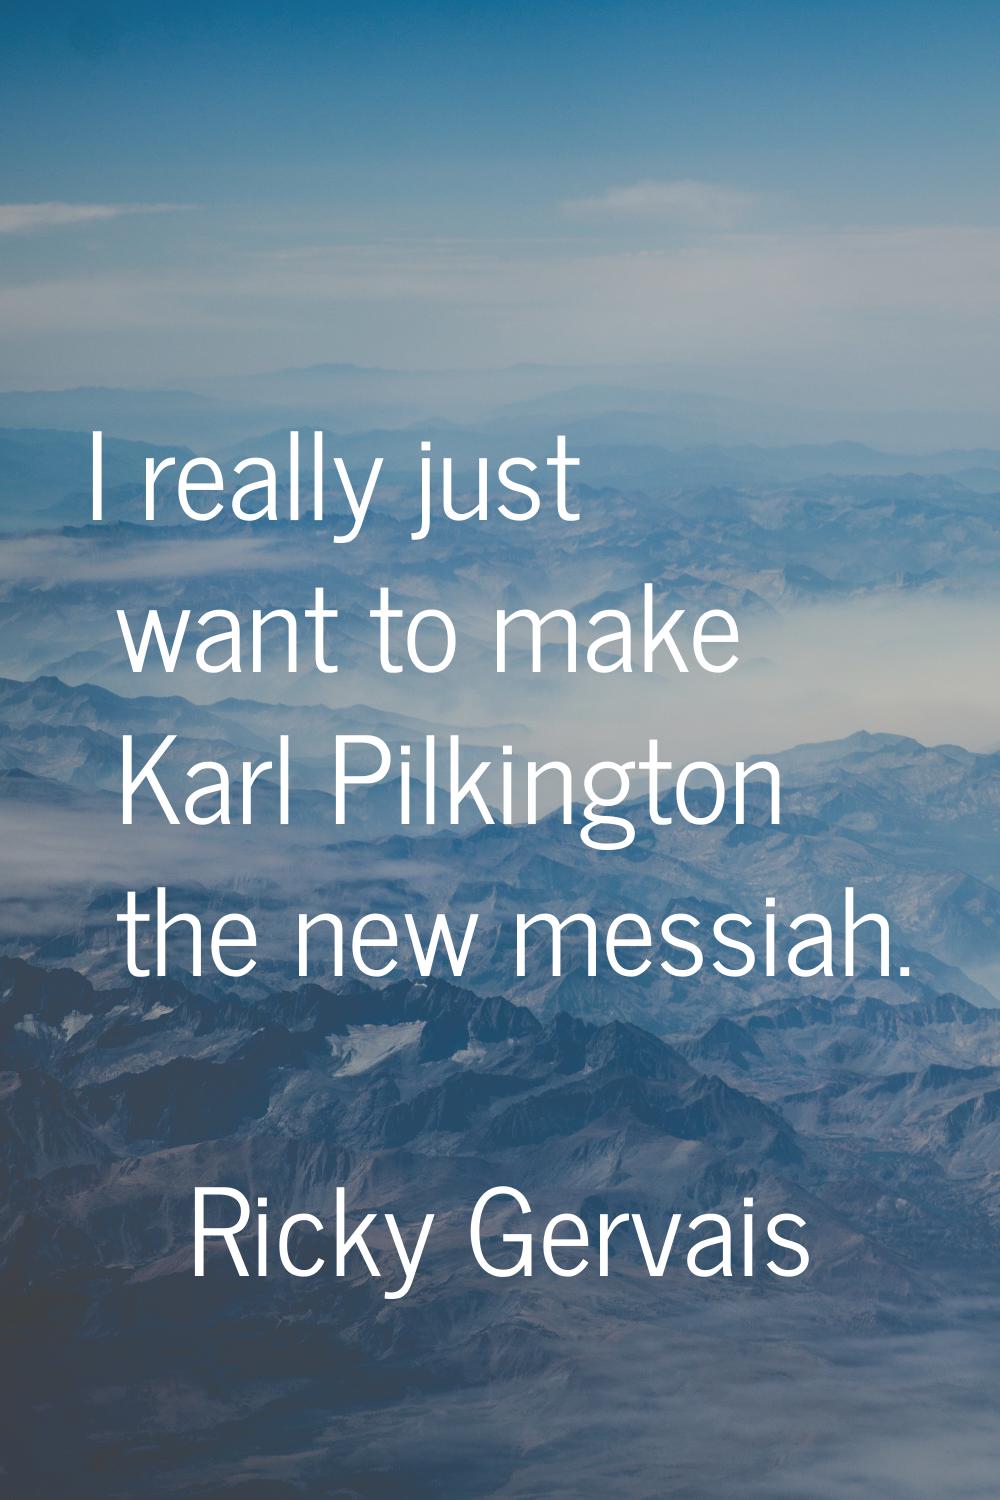 I really just want to make Karl Pilkington the new messiah.